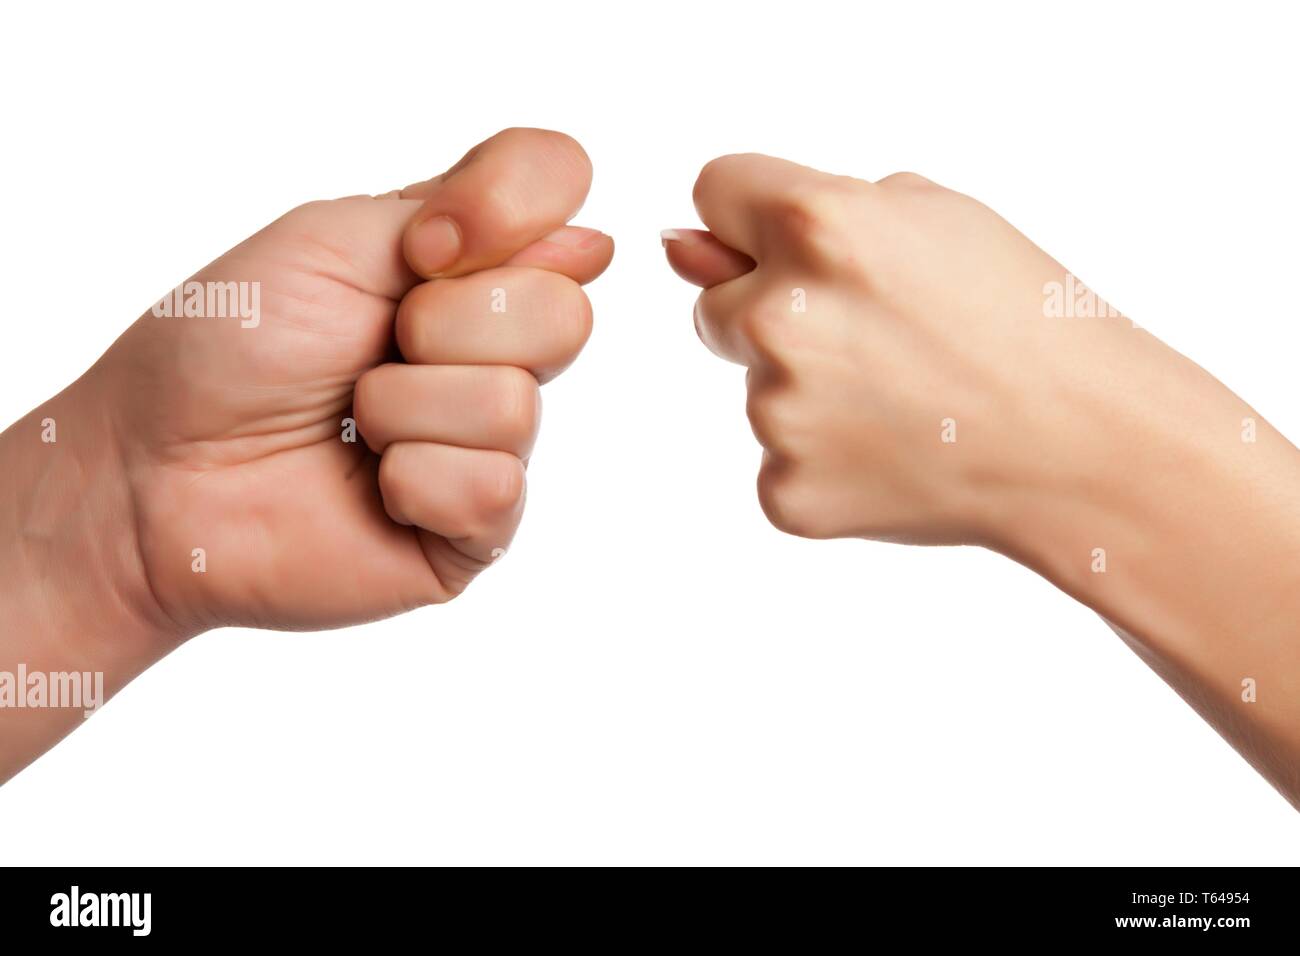 Hand power fist gesture isolated on white. Stock Photo